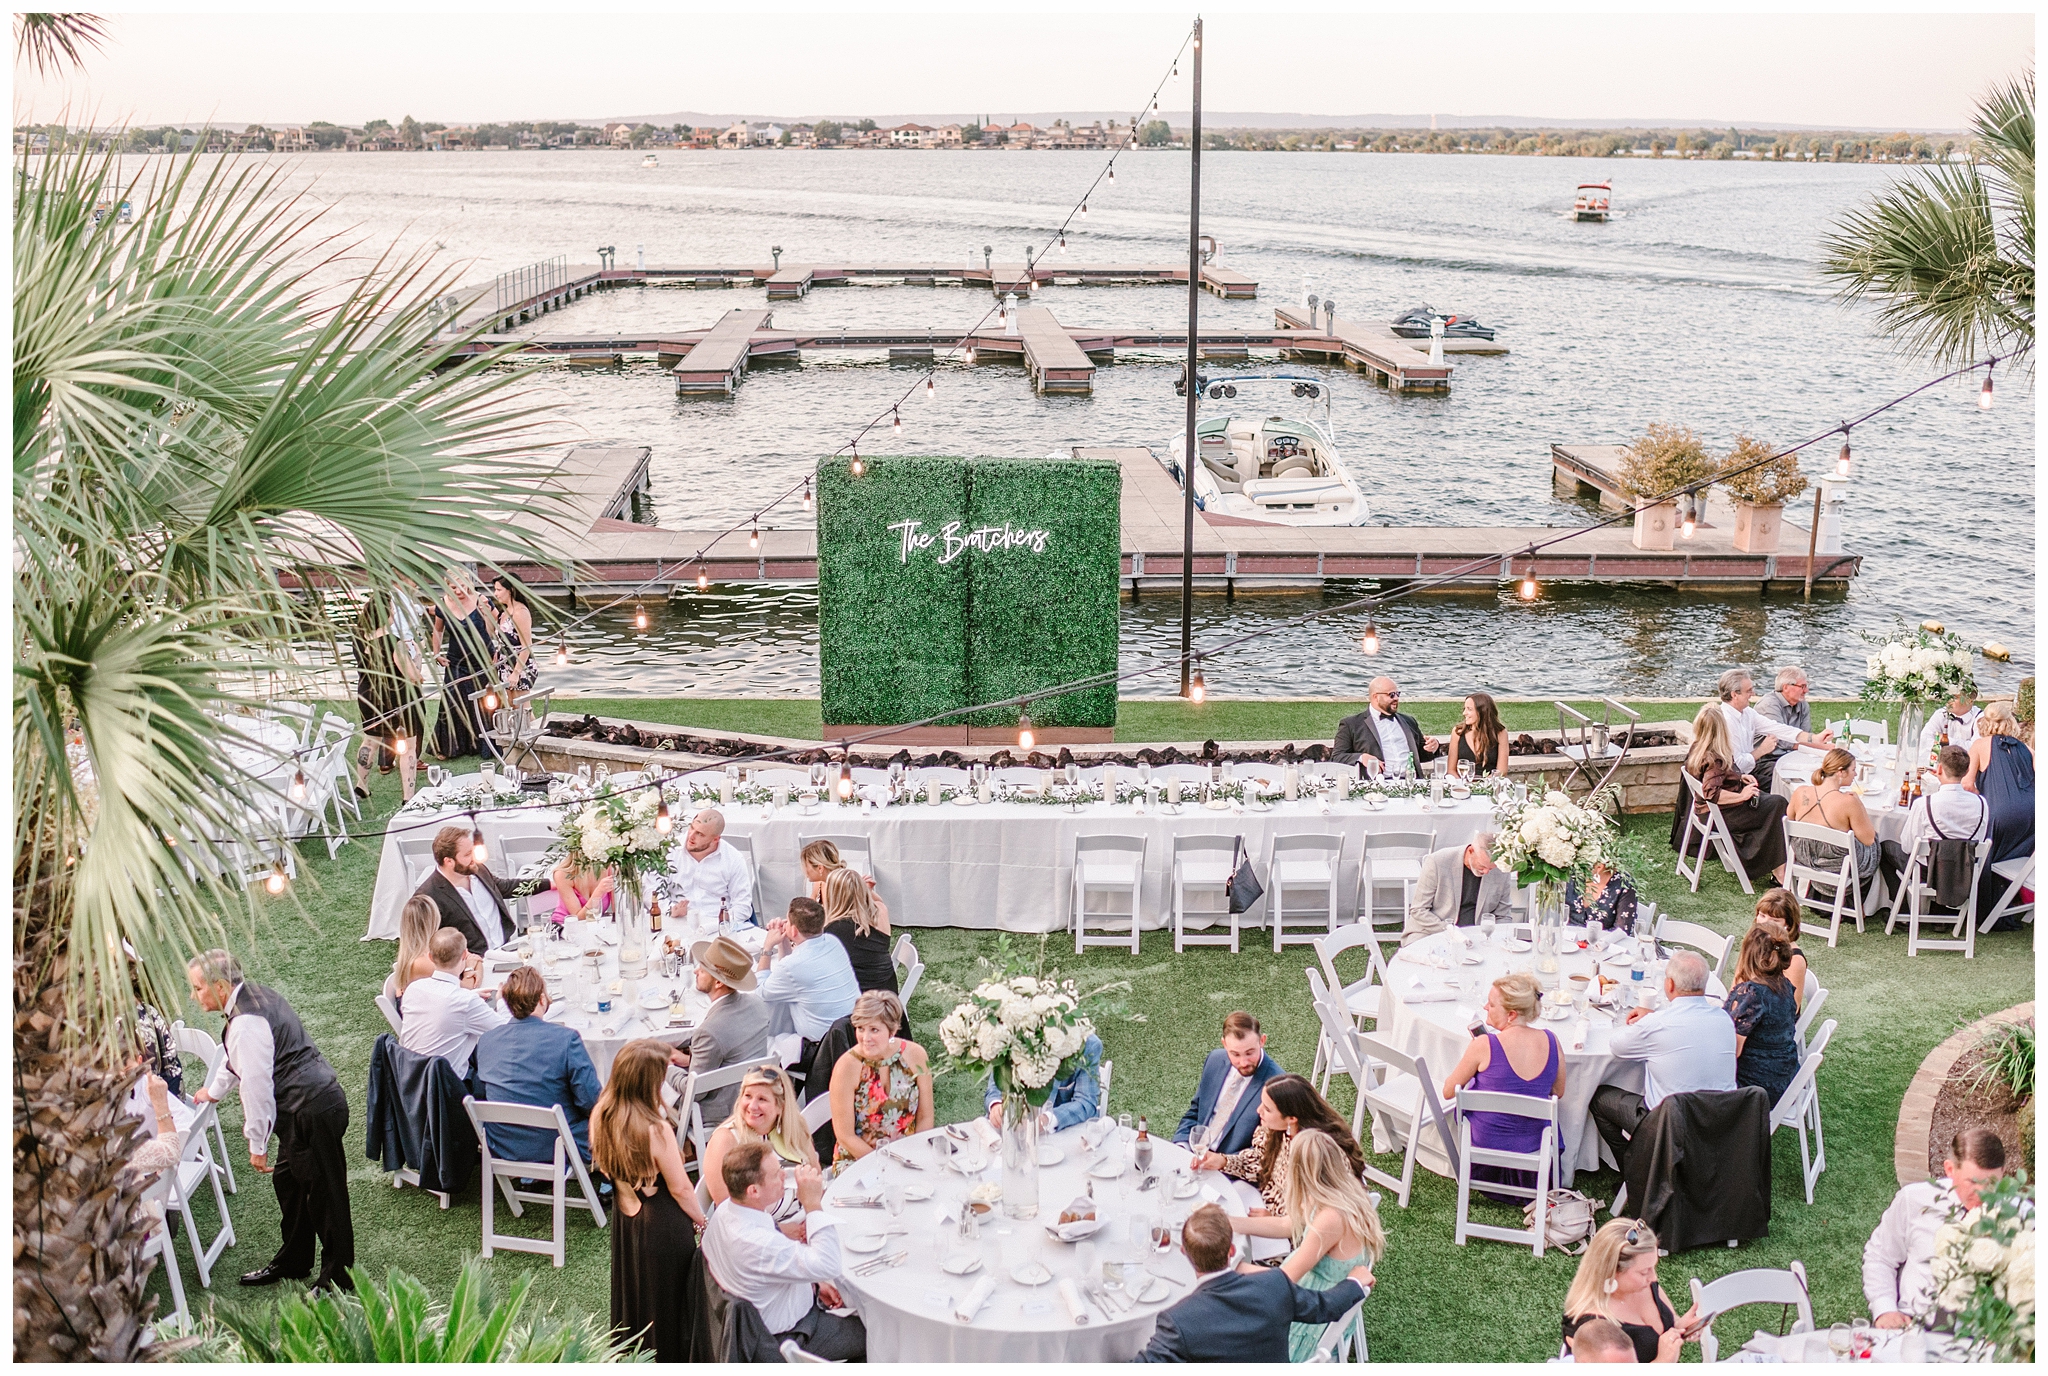 Stunning Neutral Florals for Al Fresco Waterfront Reception Tables